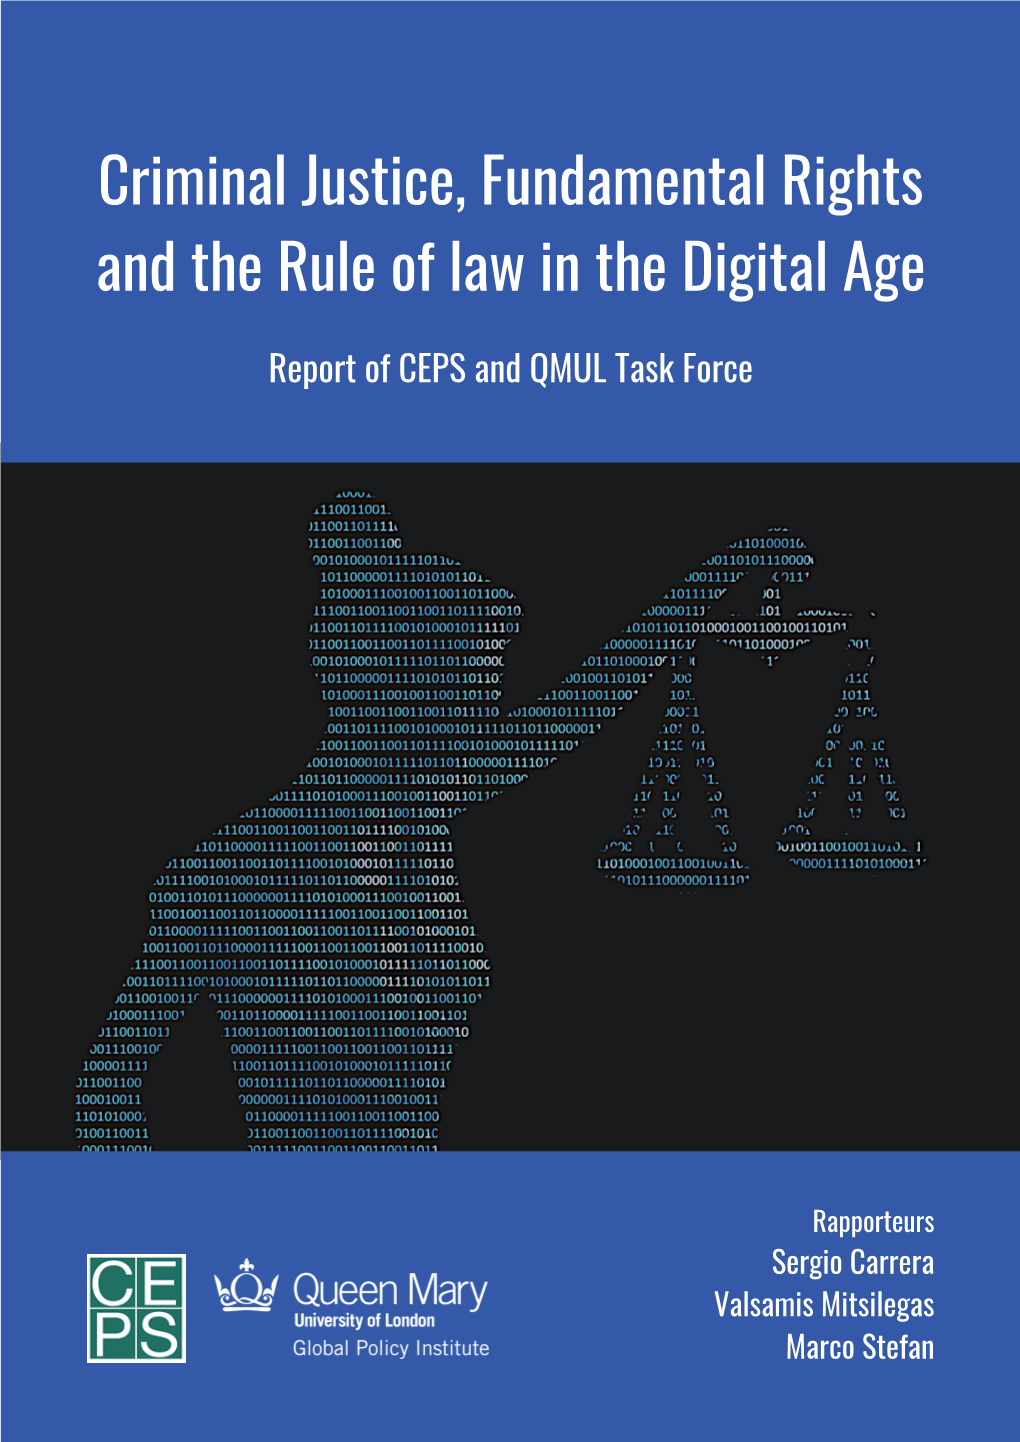 Criminal Justice, Fundamental Rights and the Rule of Law in the Digital Age